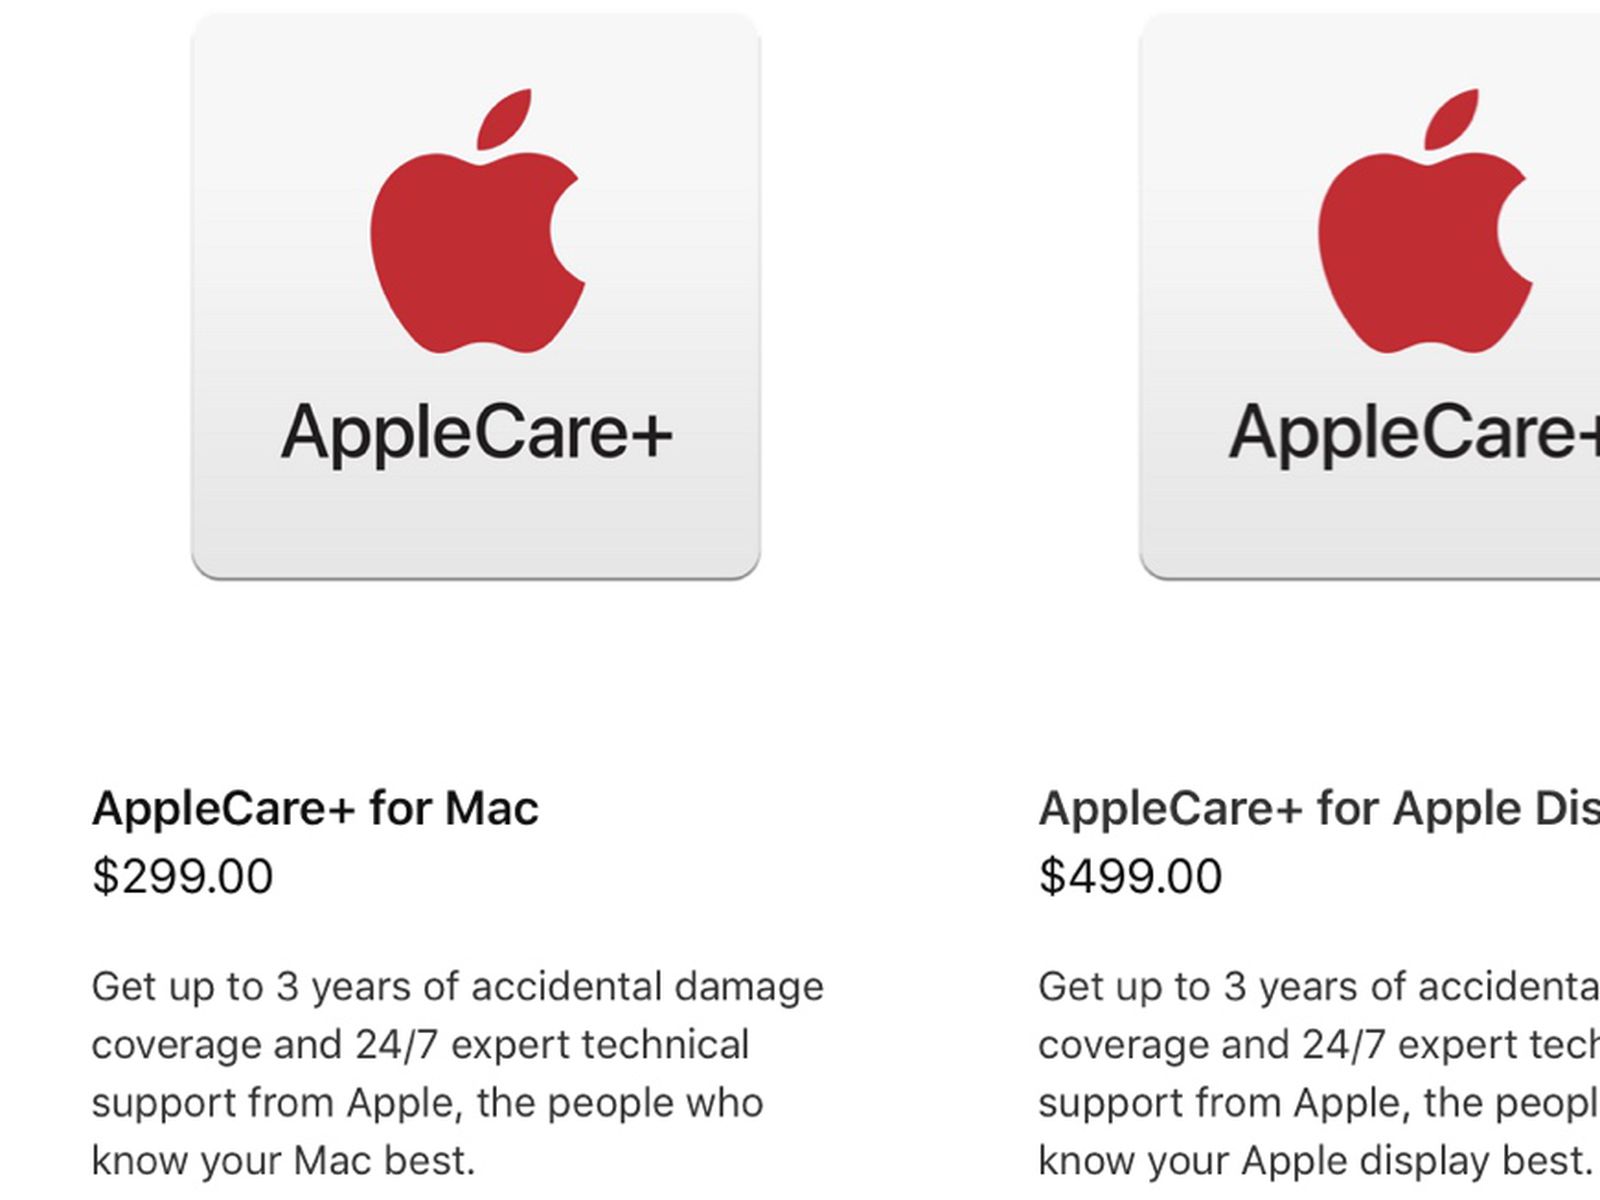 can i purchase applecare plus online